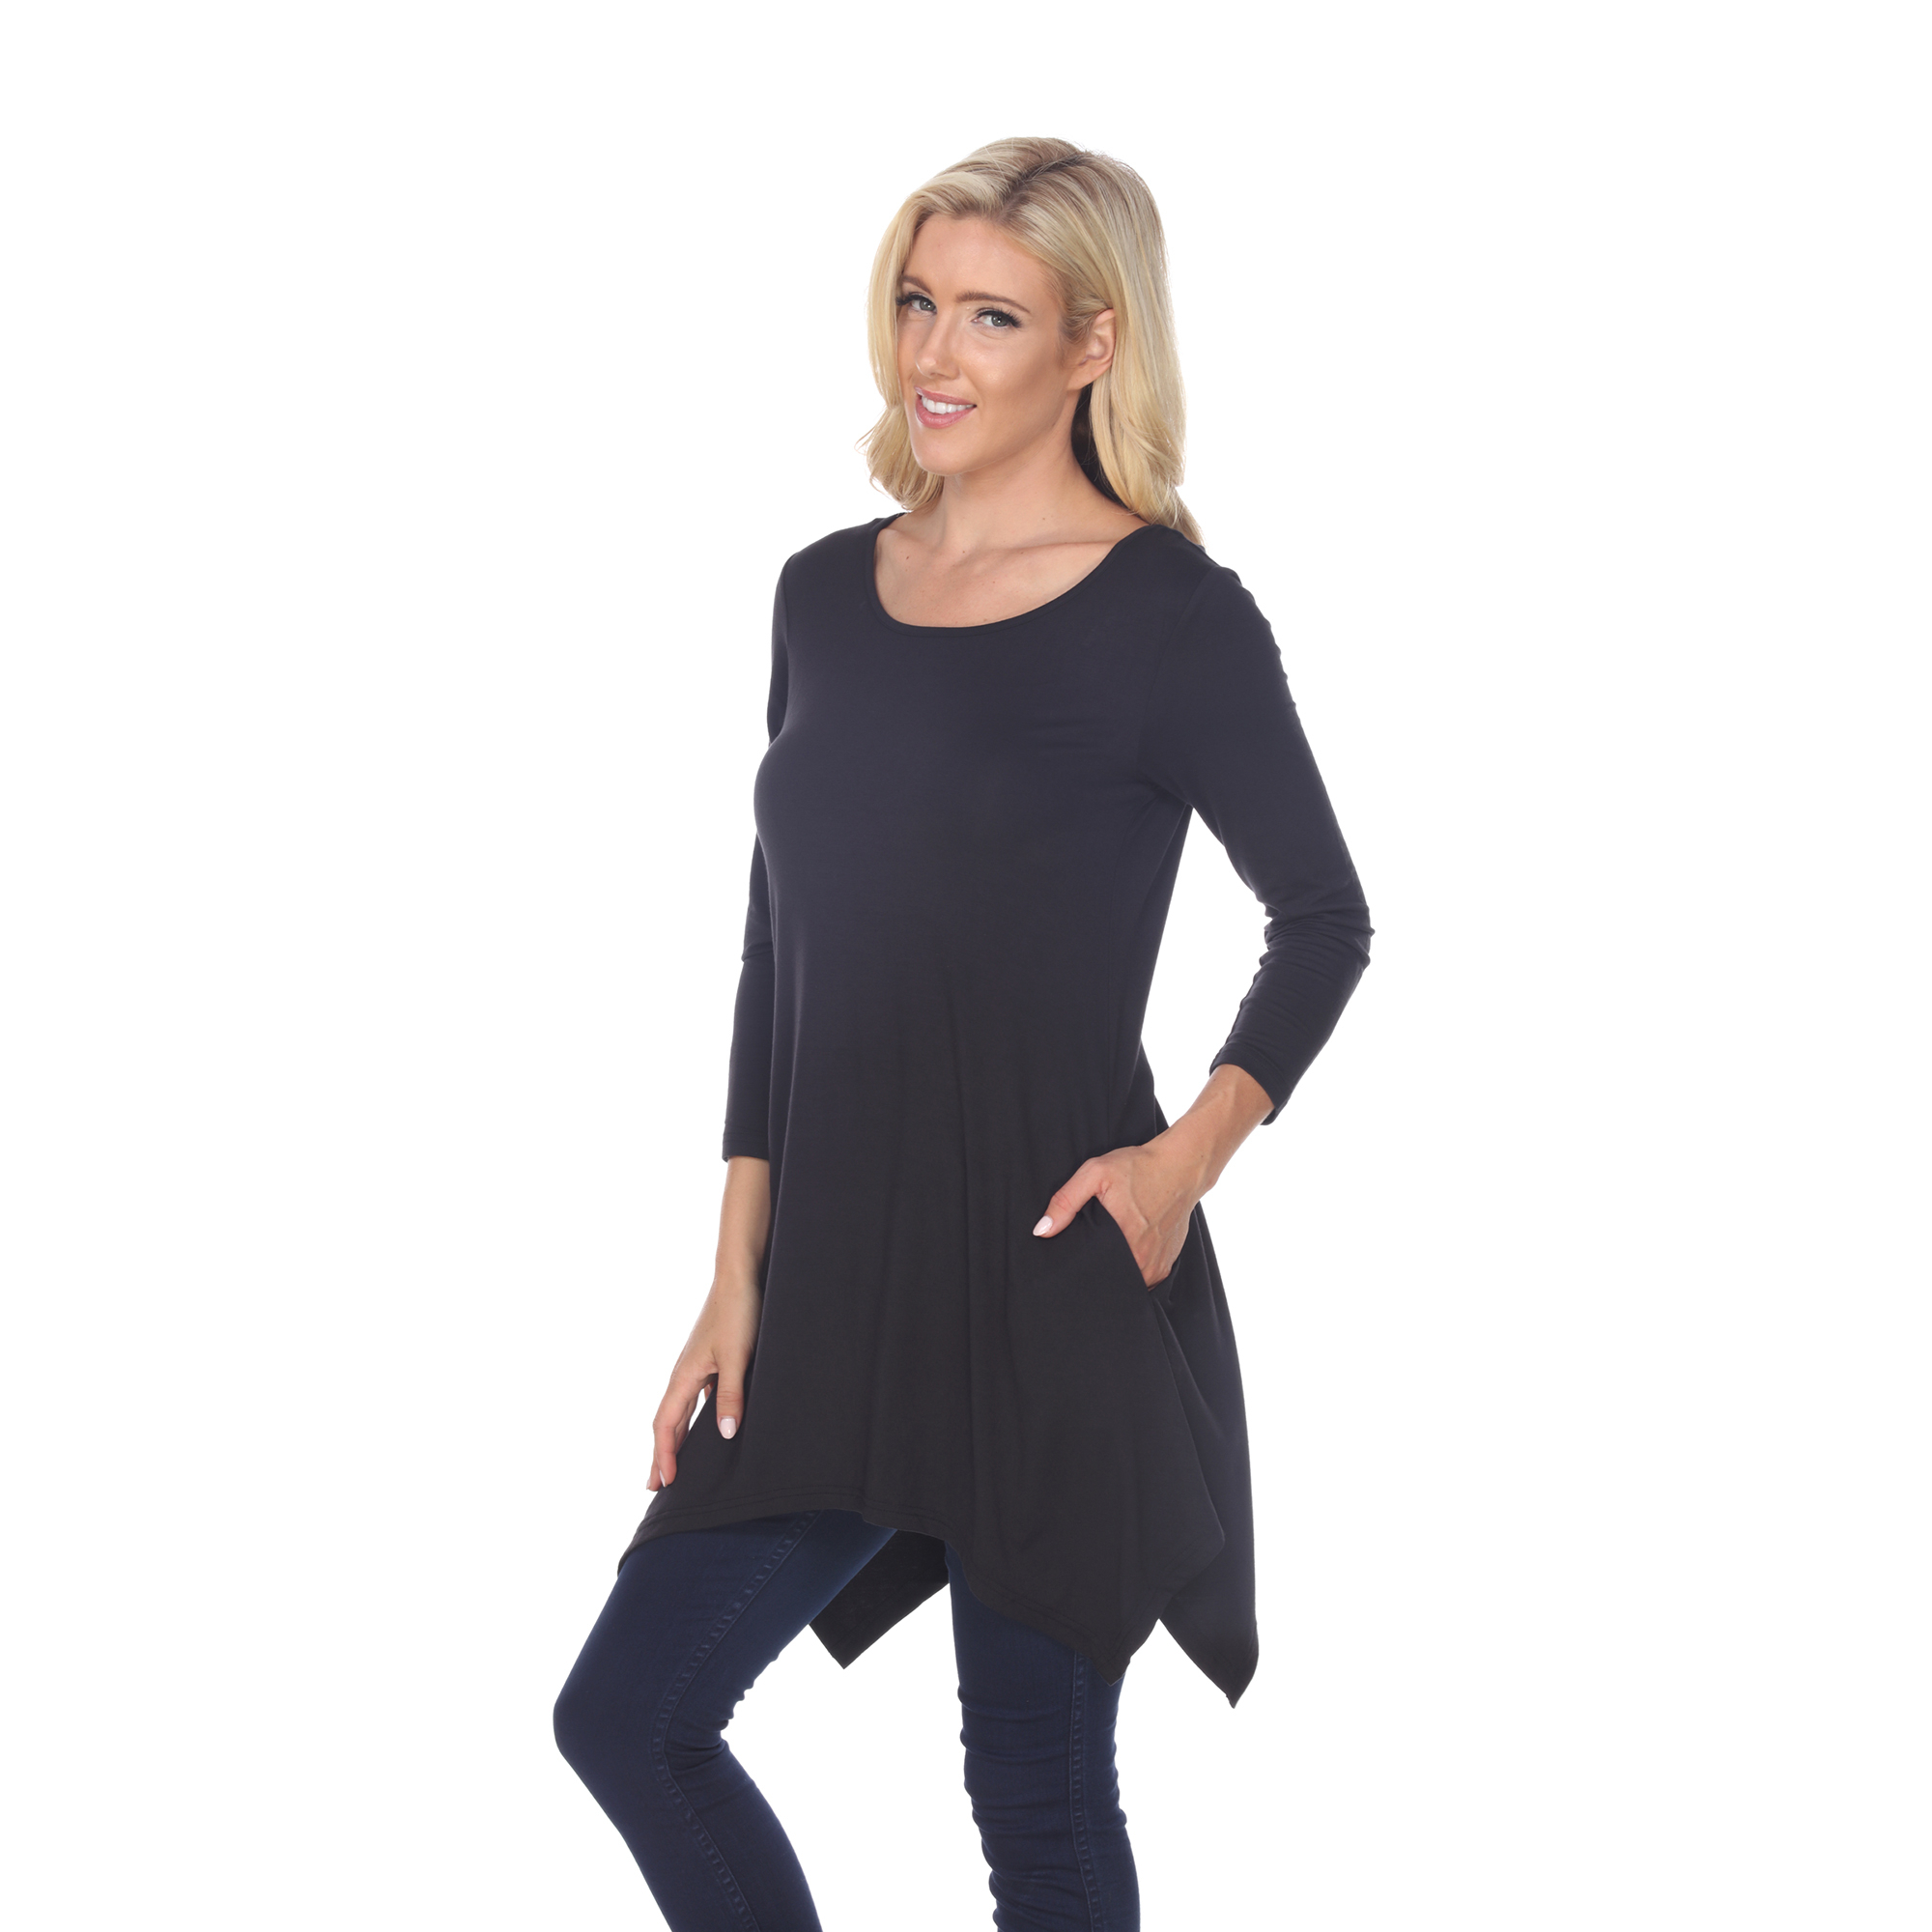 White Mark Women's Quarter Sleeve Tunic Top With Pockets - Charcoal, 2X